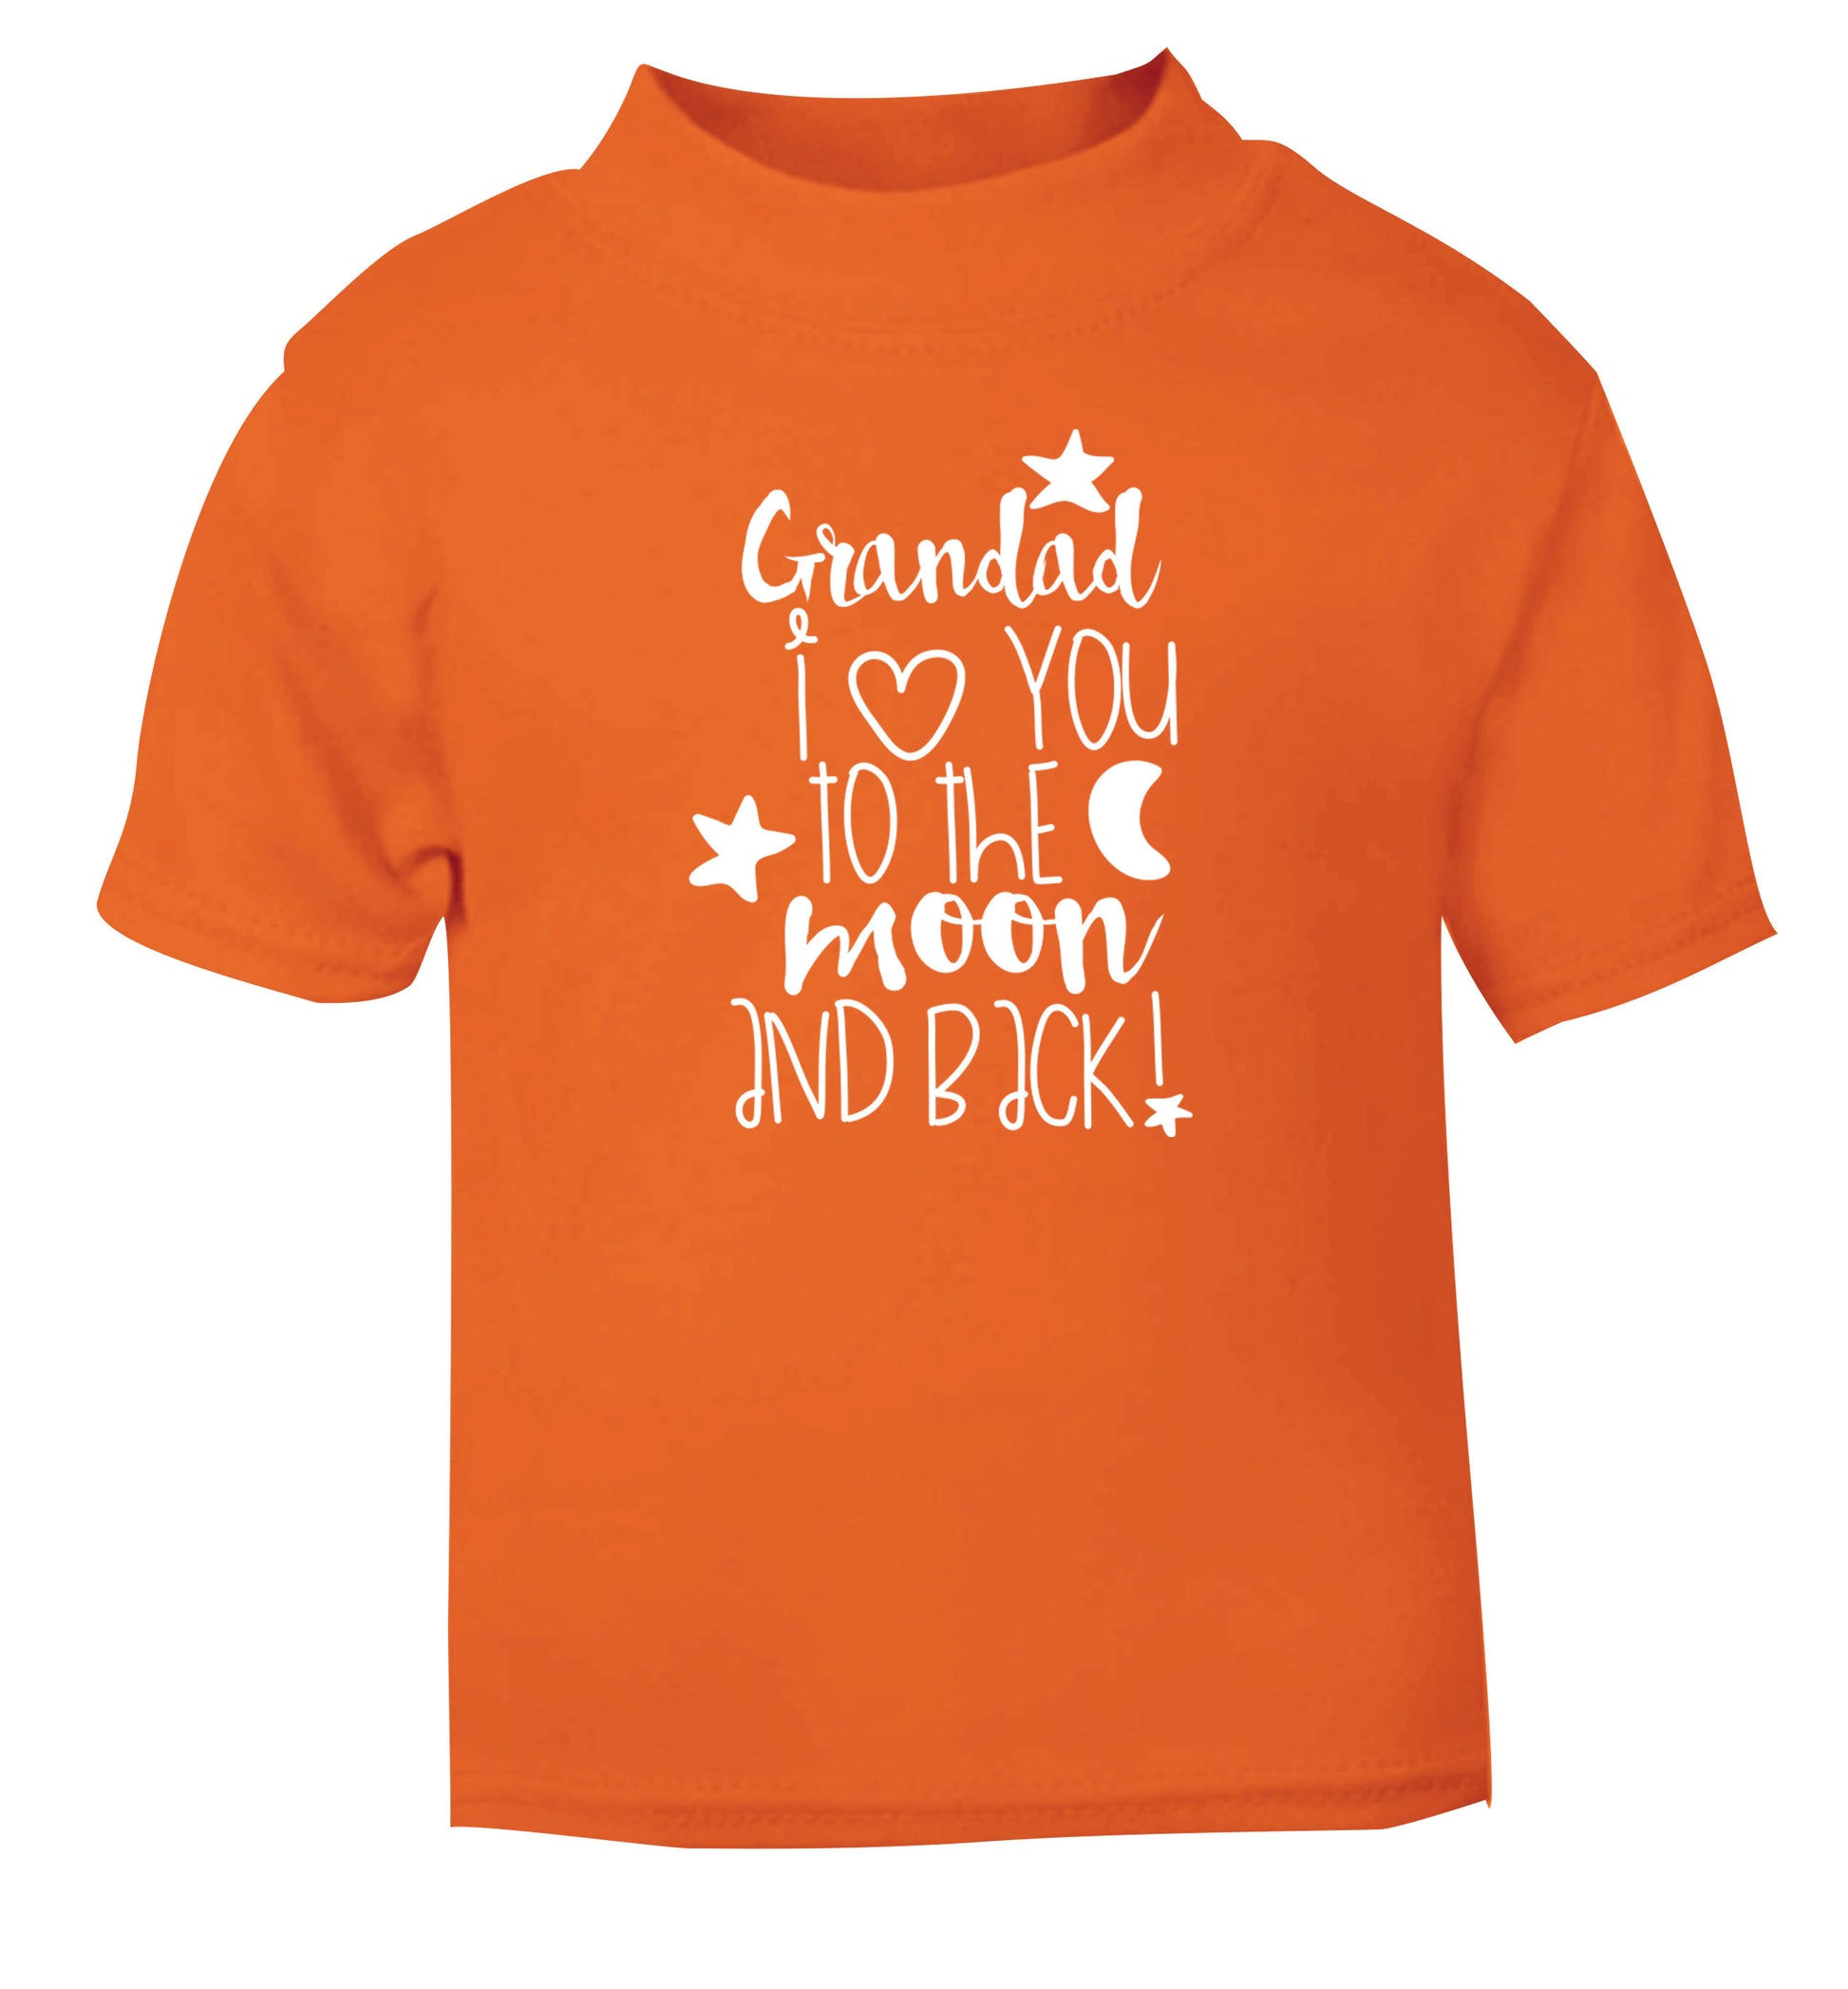 Grandad's I love you to the moon and back orange Baby Toddler Tshirt 2 Years